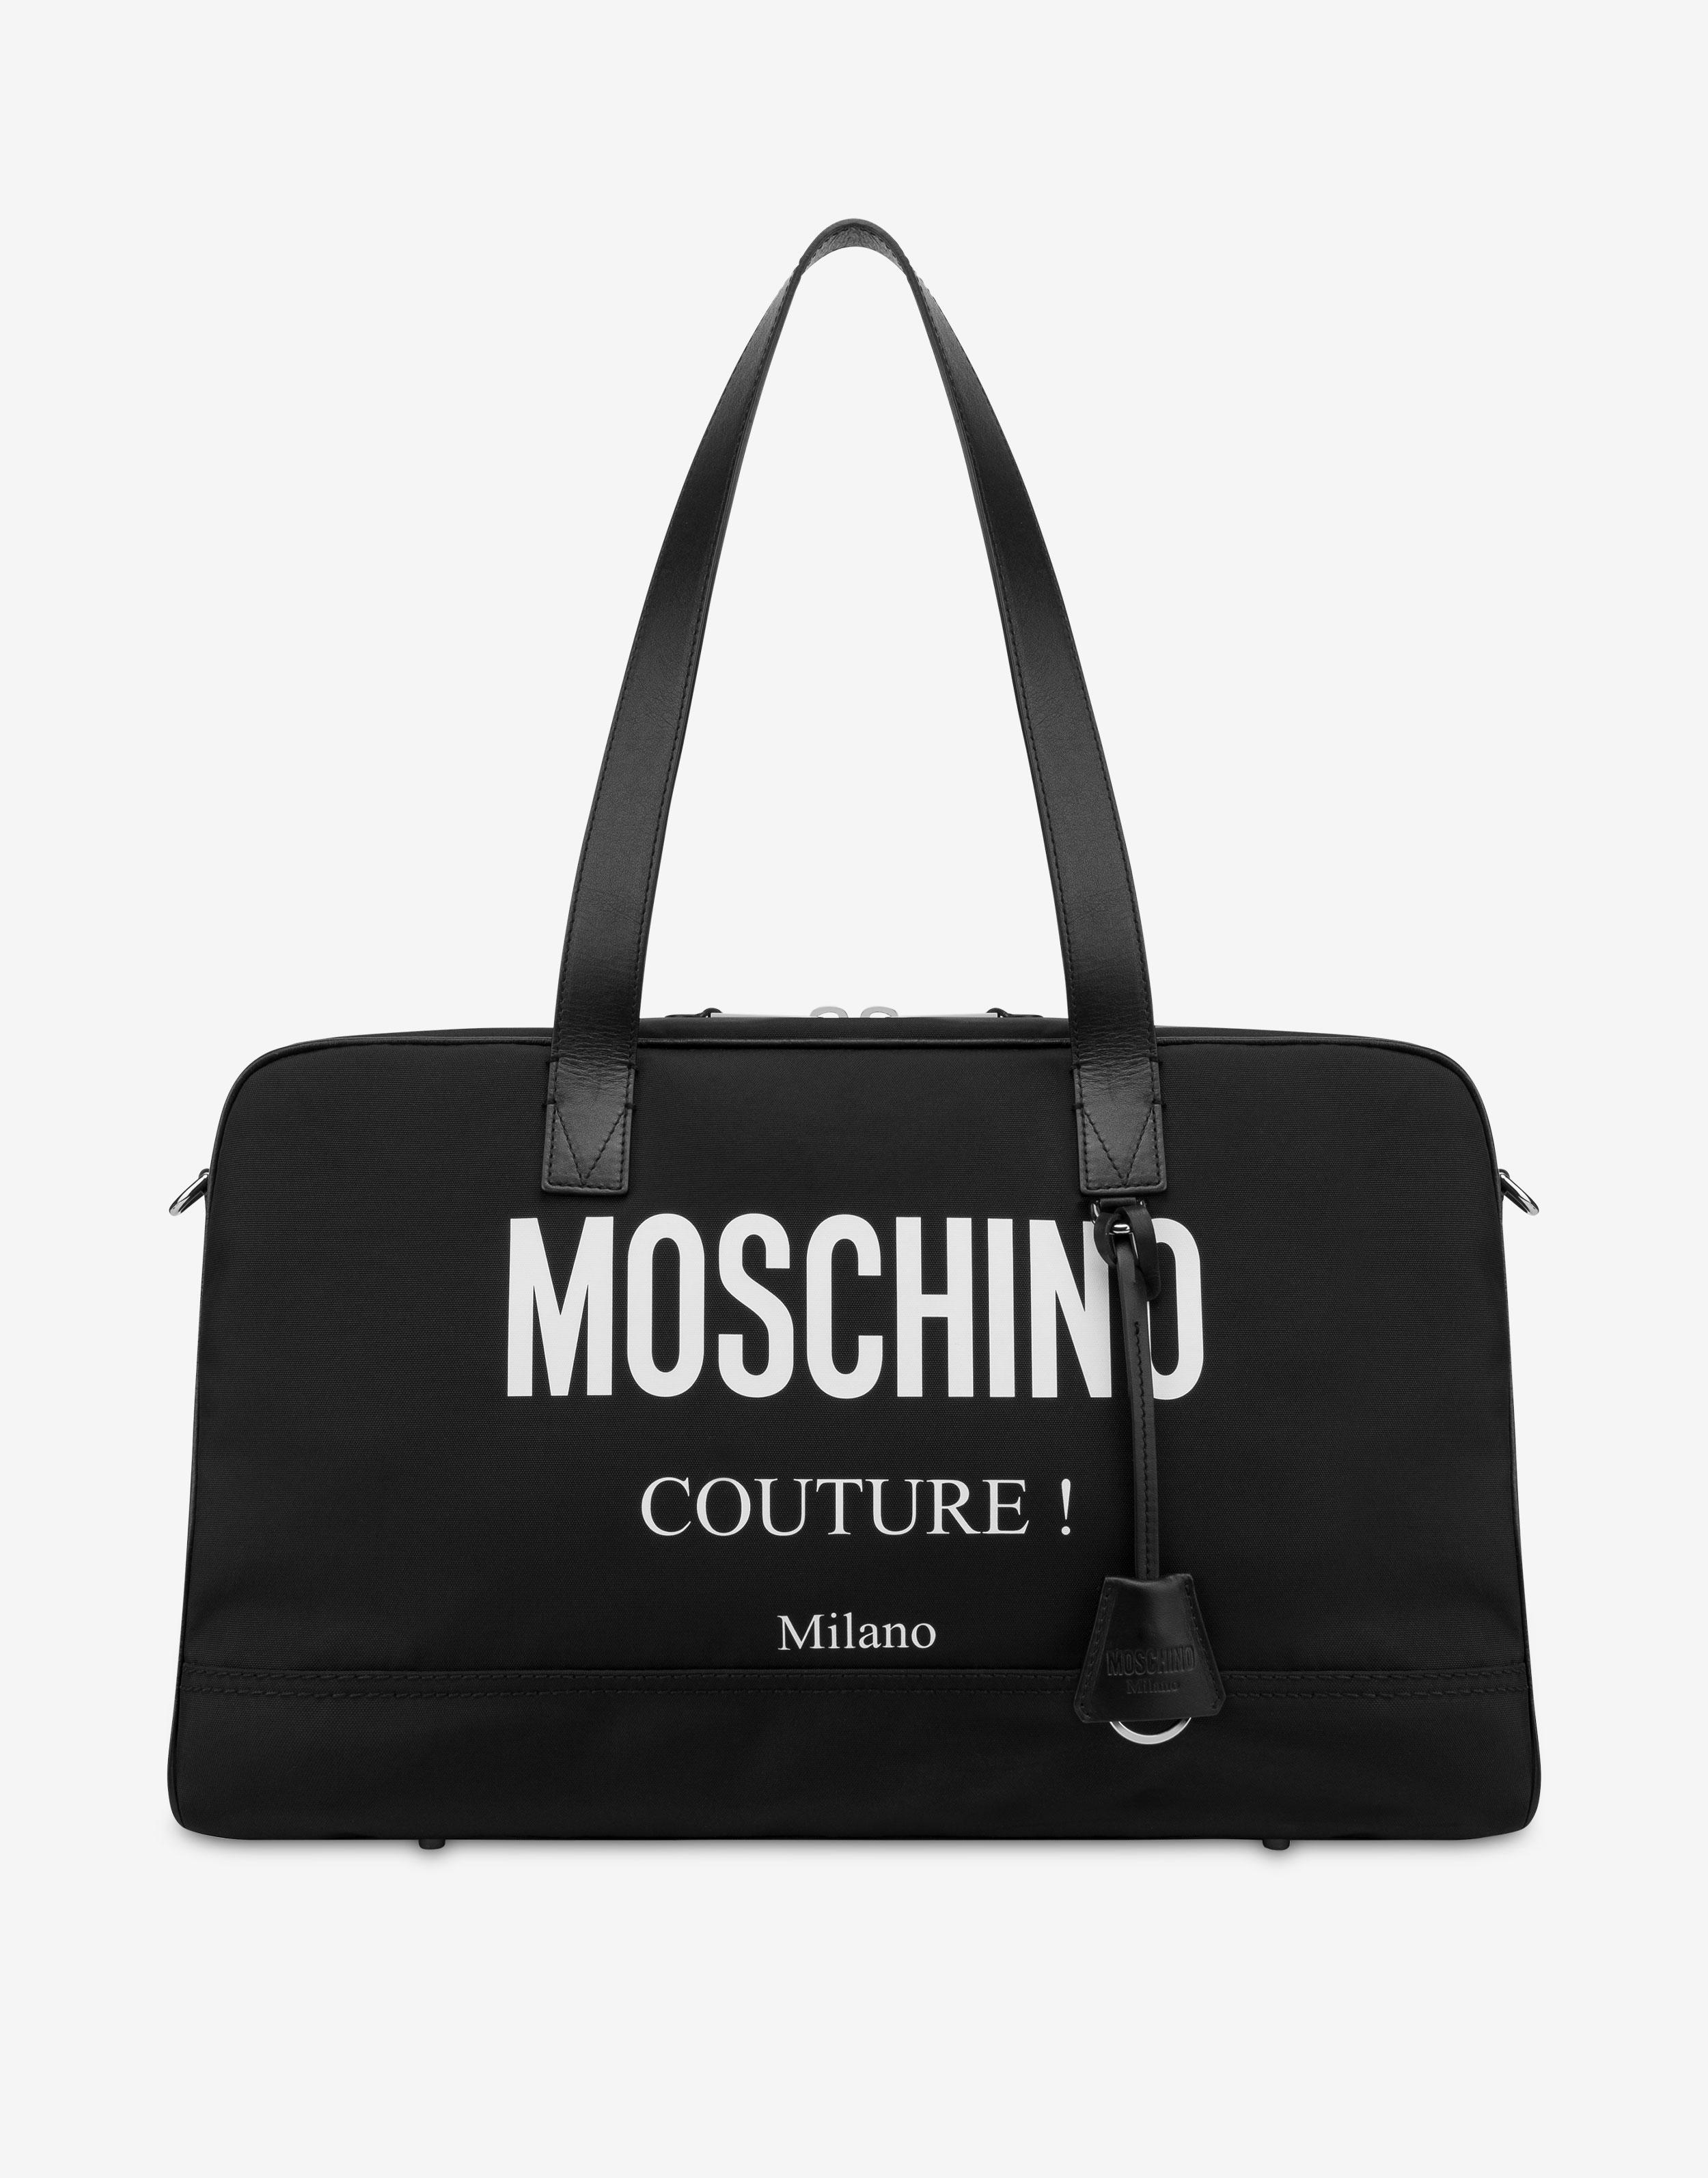 Moschino Couture Nylon Travel Bag in Black |